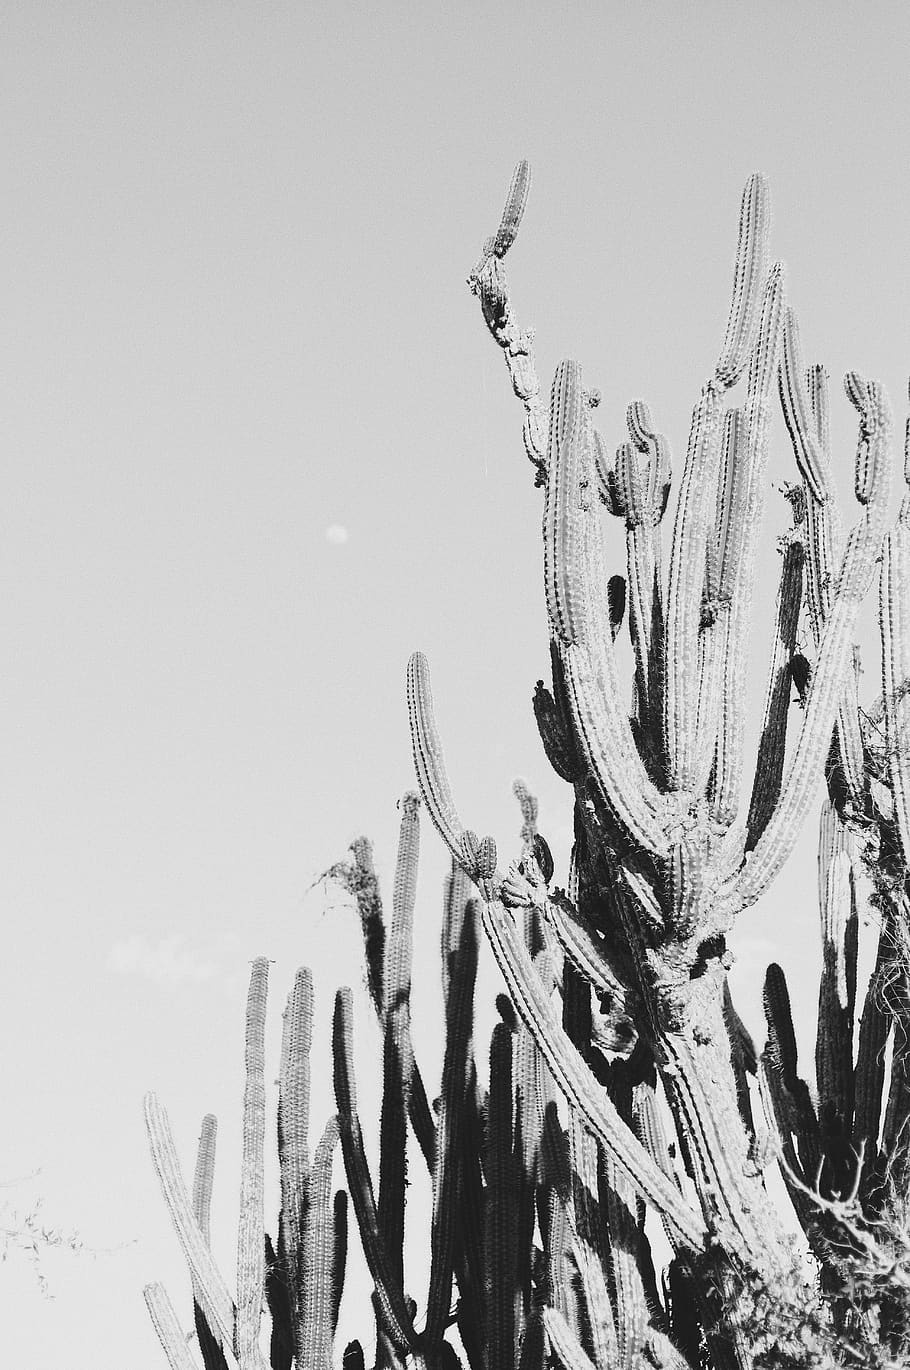 grayscale cactus, plant, outdoors, cacti, cuba, black and white